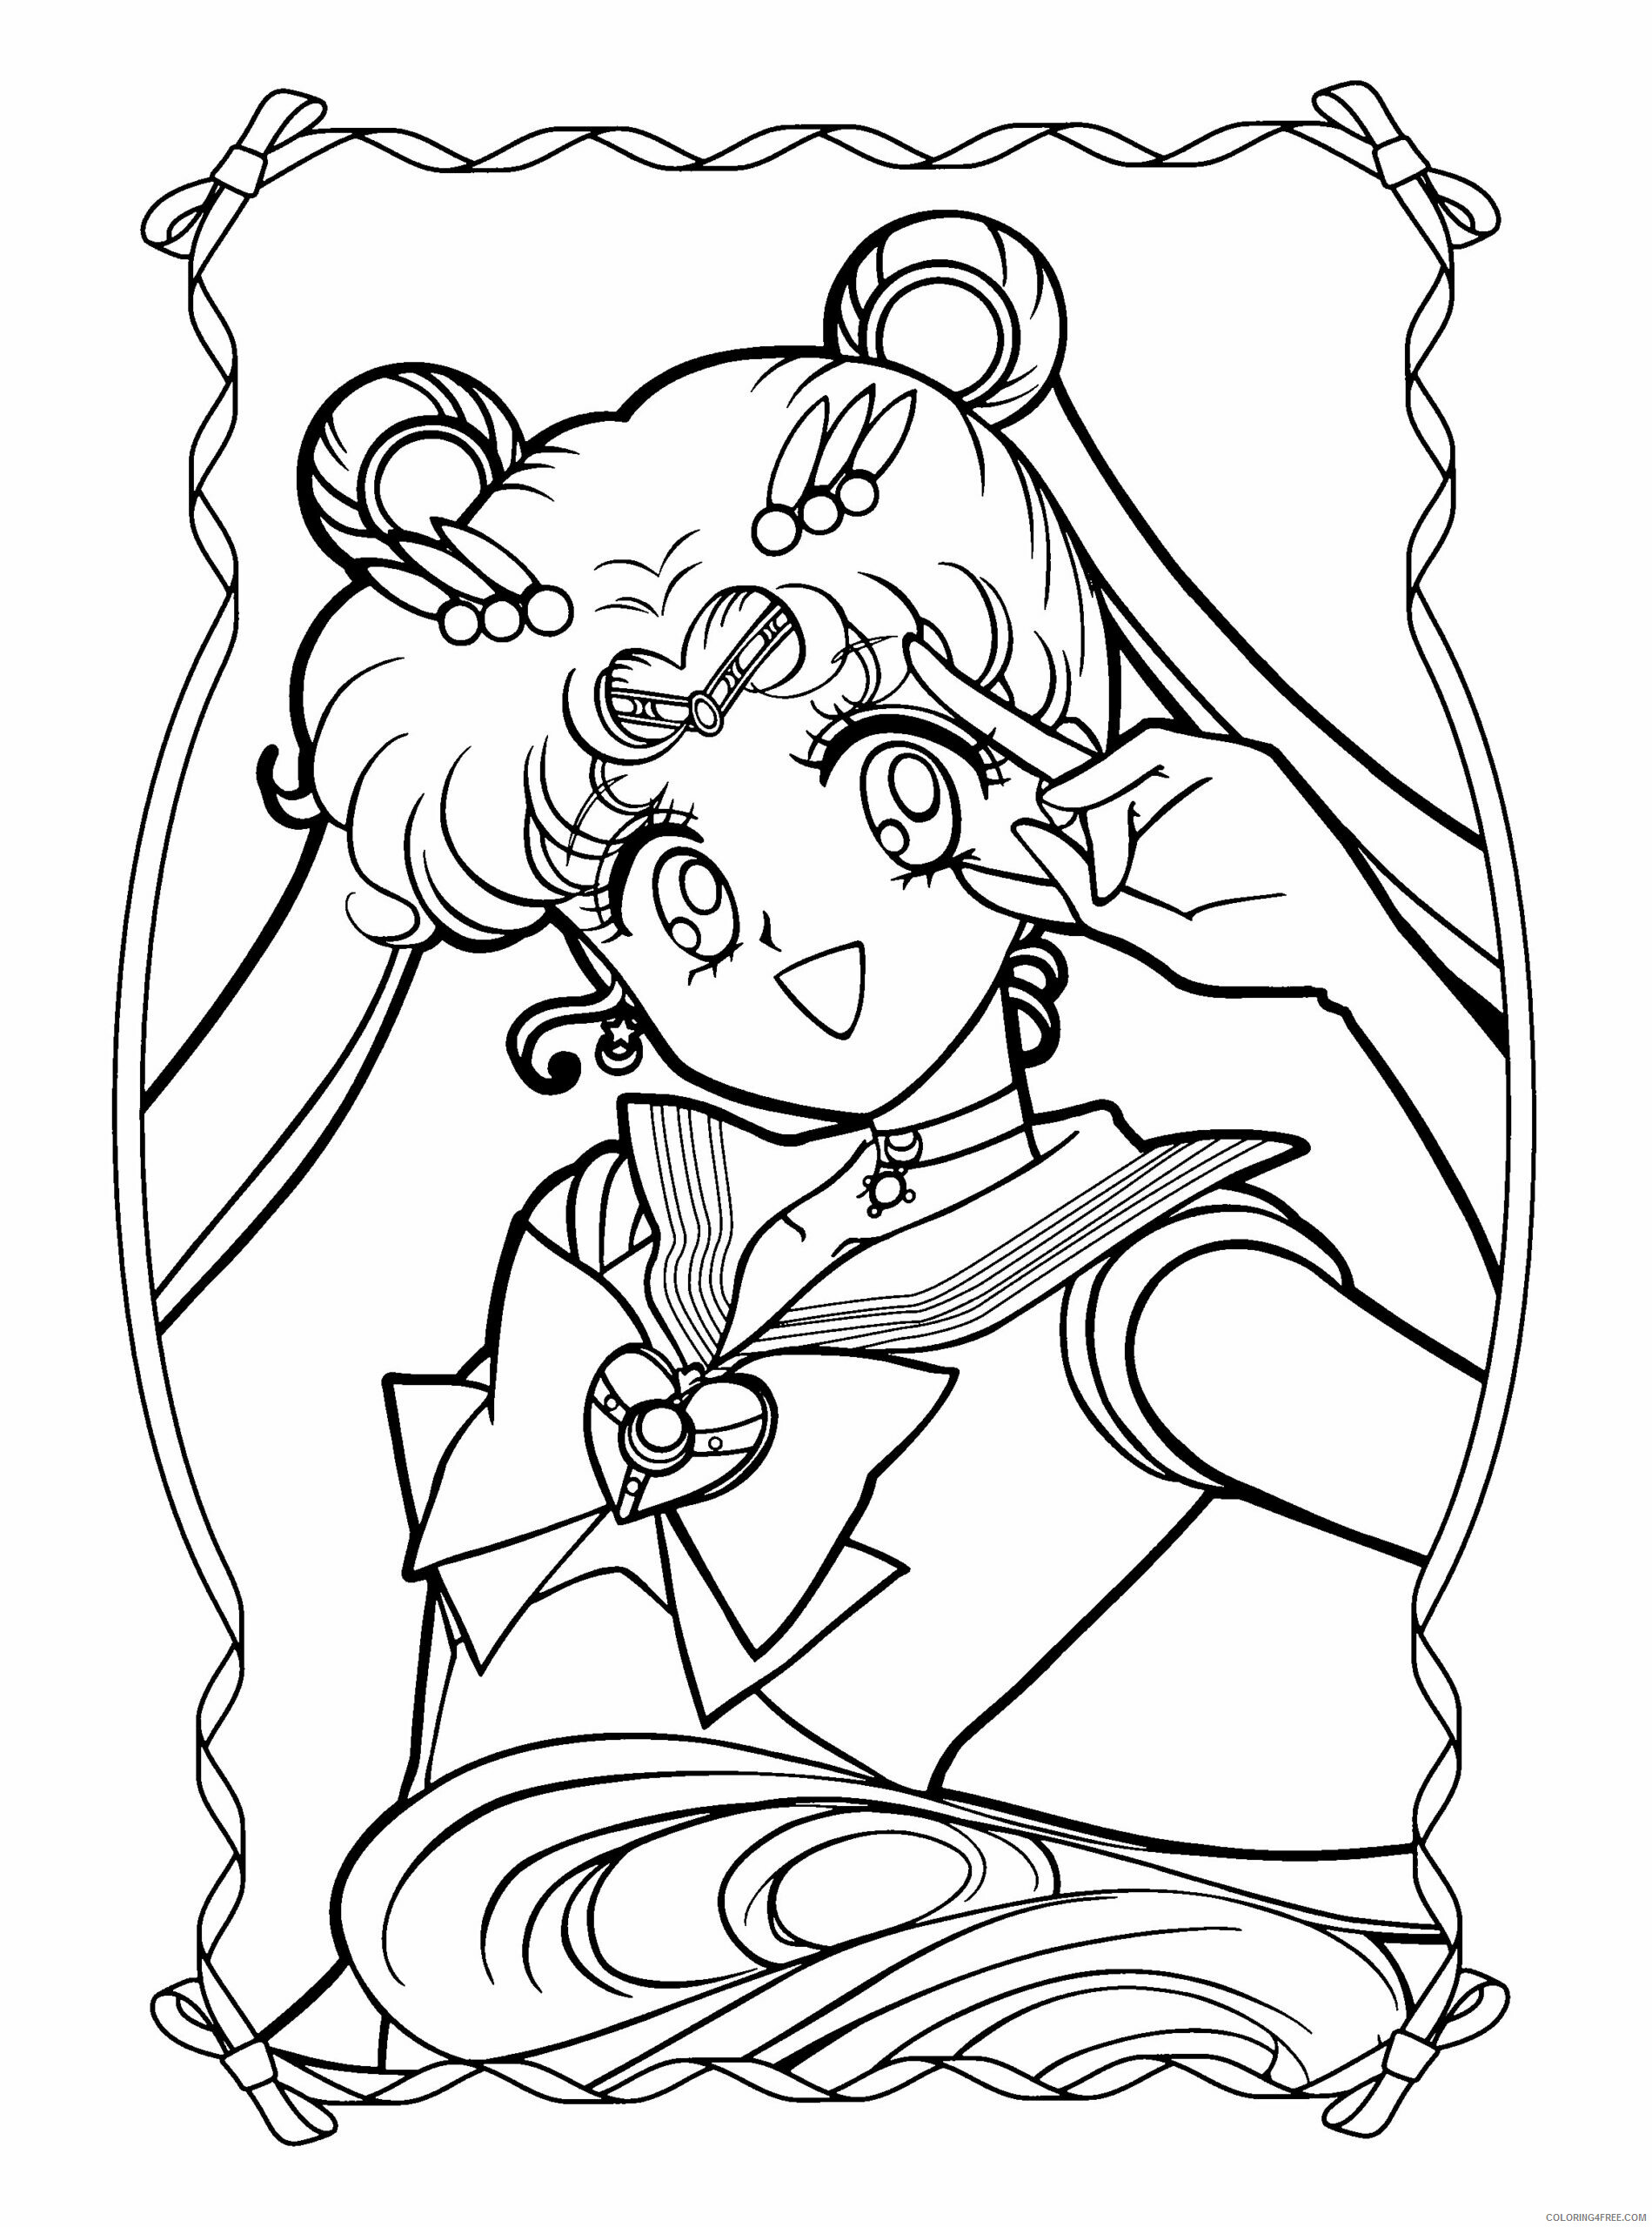 Sailor Moon Printable Coloring Pages Anime sailormoon gT6tQ 2021 0989 Coloring4free